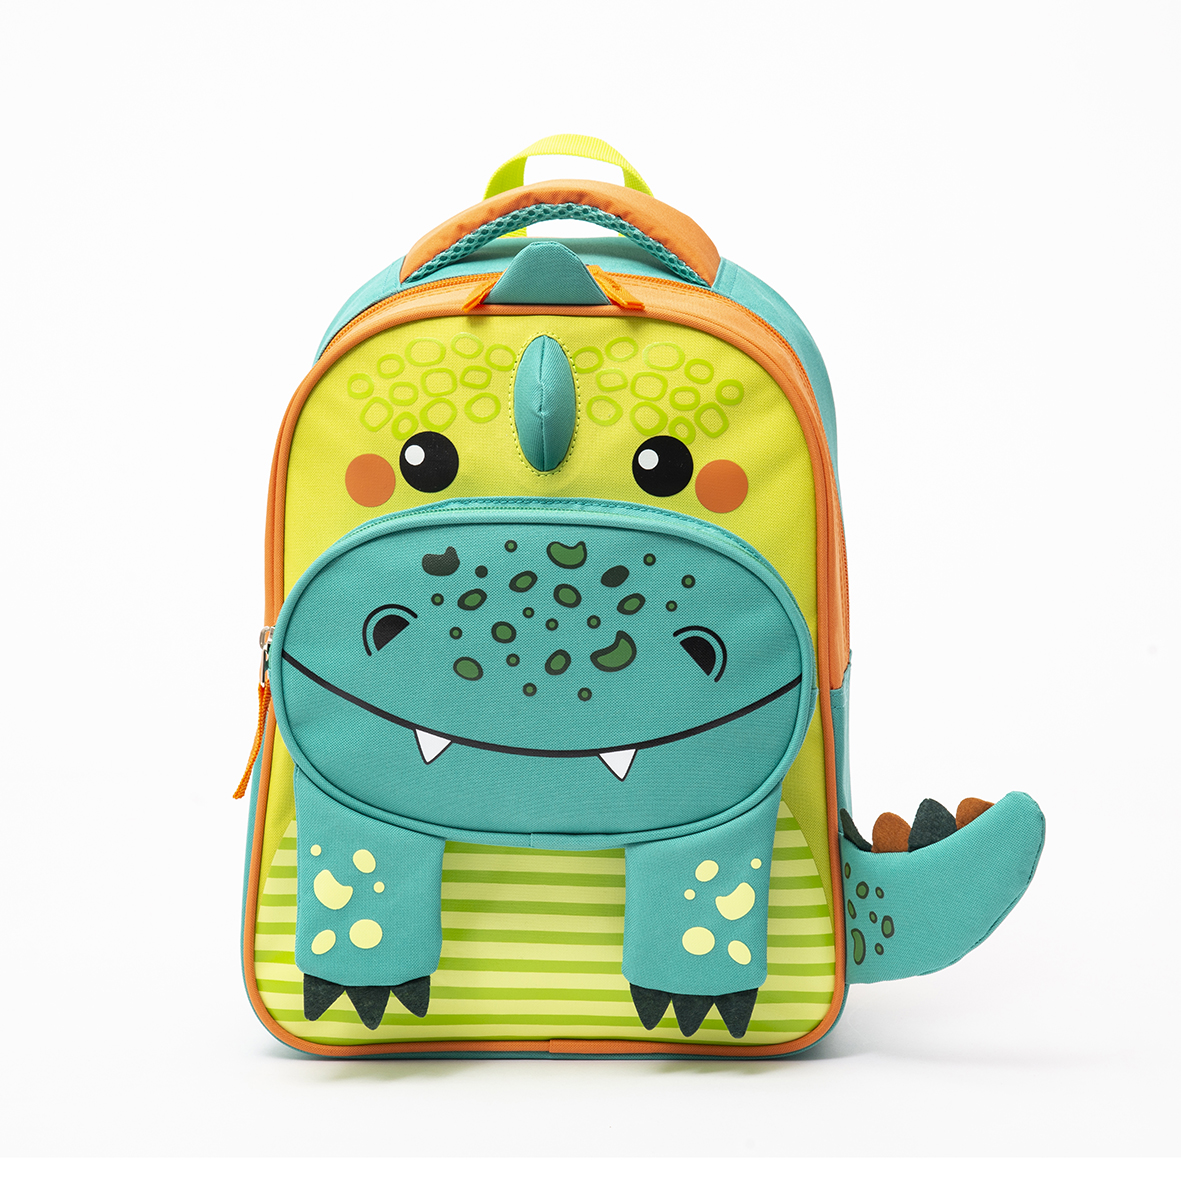 Factory selling Backpack For Kids - New design cute stereoscopic green crocodile kids bag – Twinkling Star